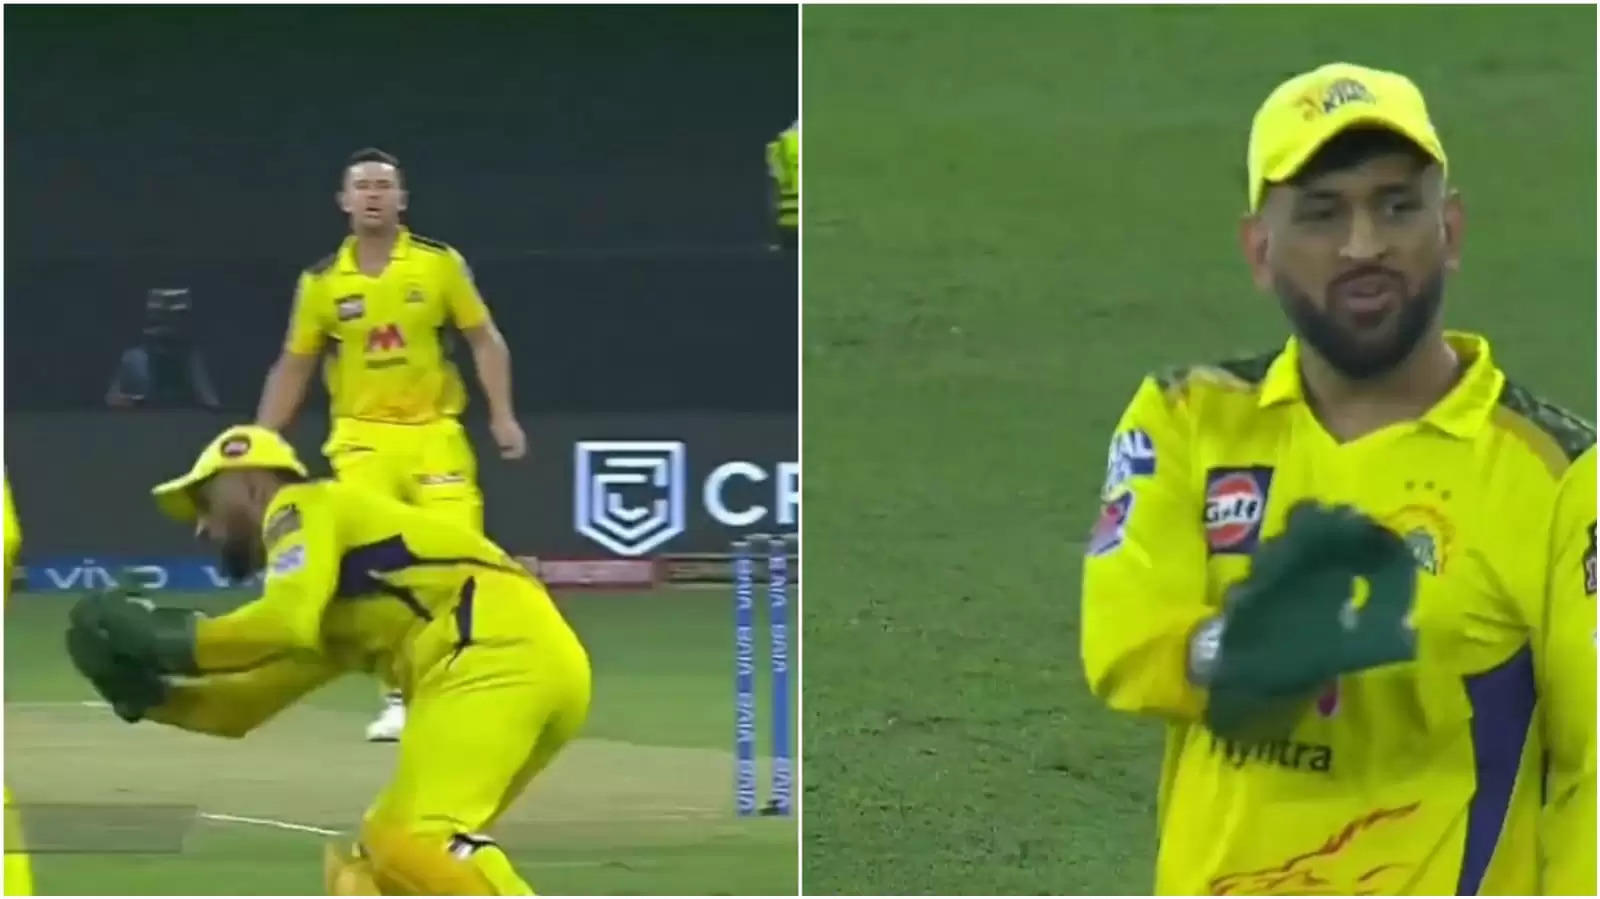 WATCH: MS Dhoni drops a sitter; commentator defends him stating those ones are “hard”